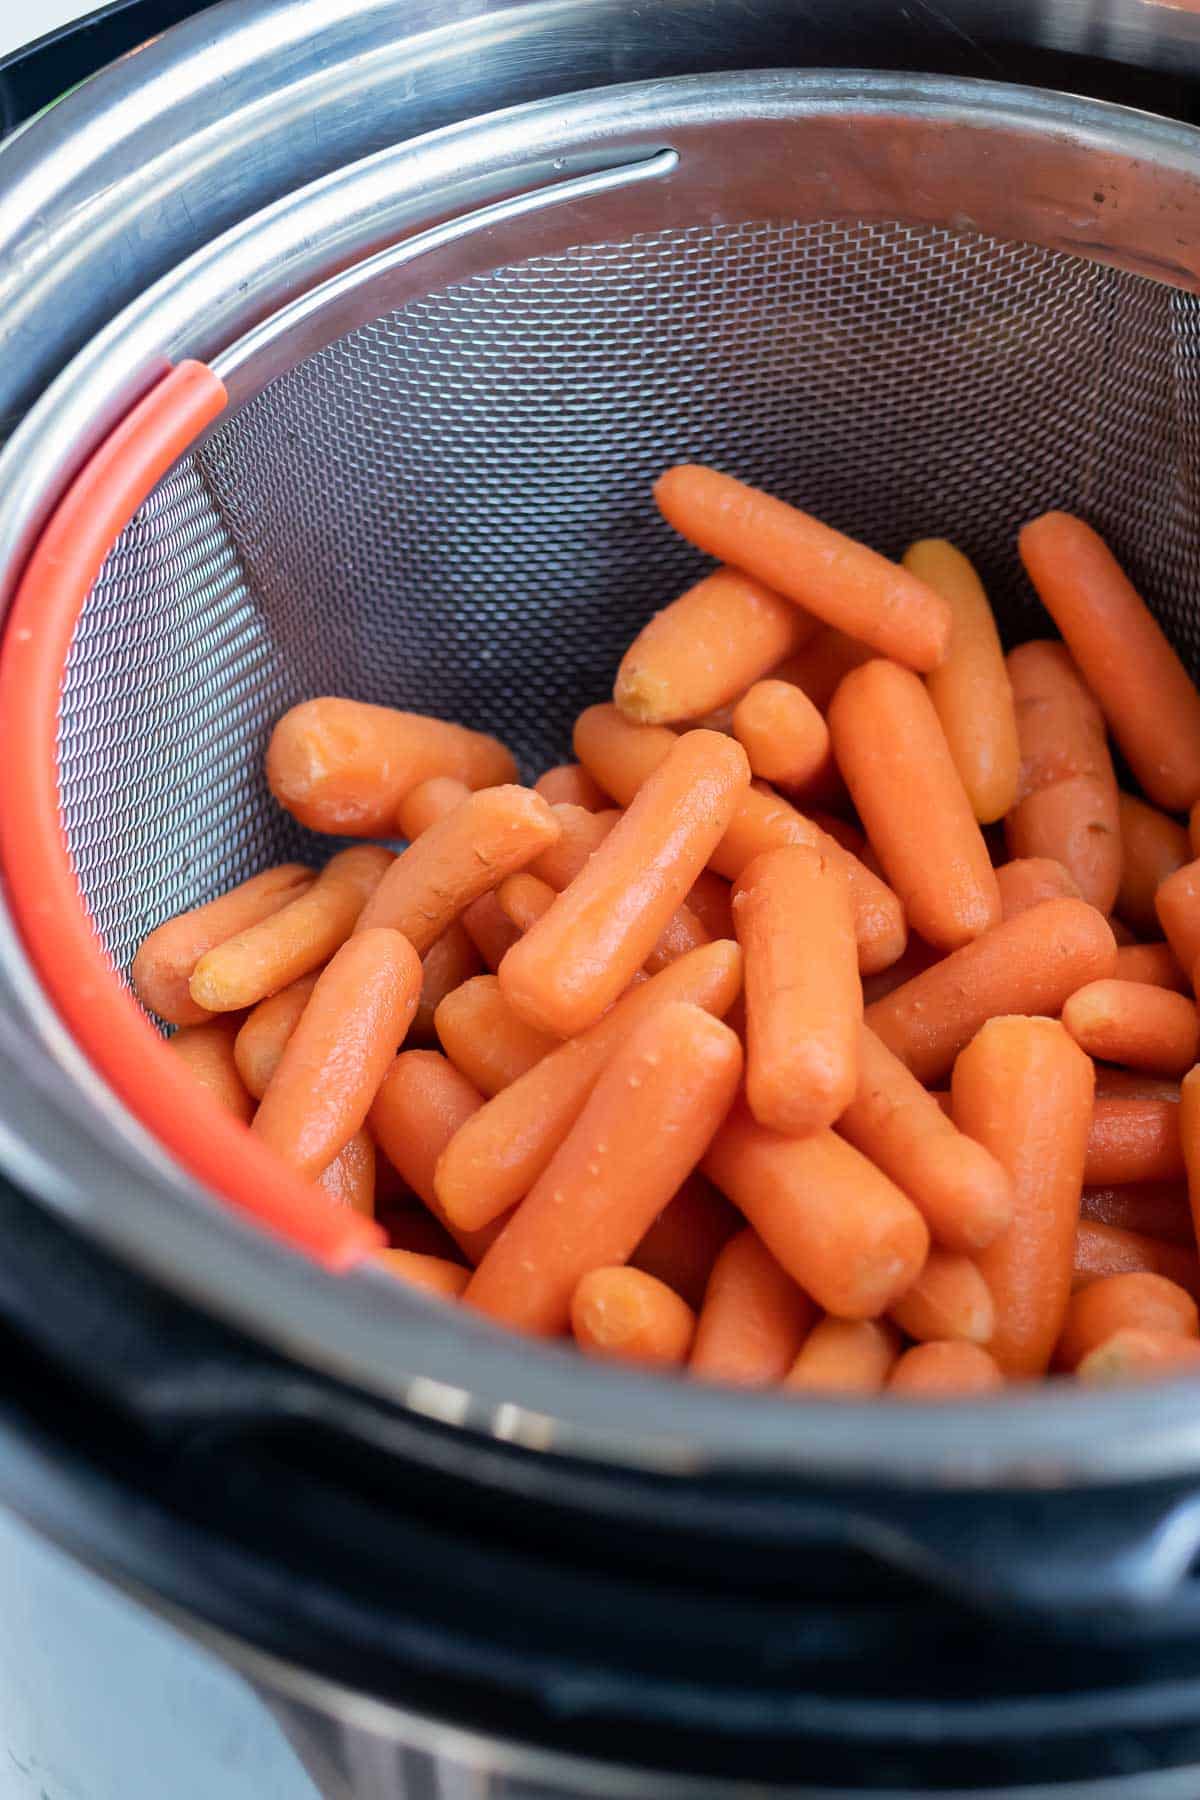 Carrots are placed in the pressure cooker for this recipe.